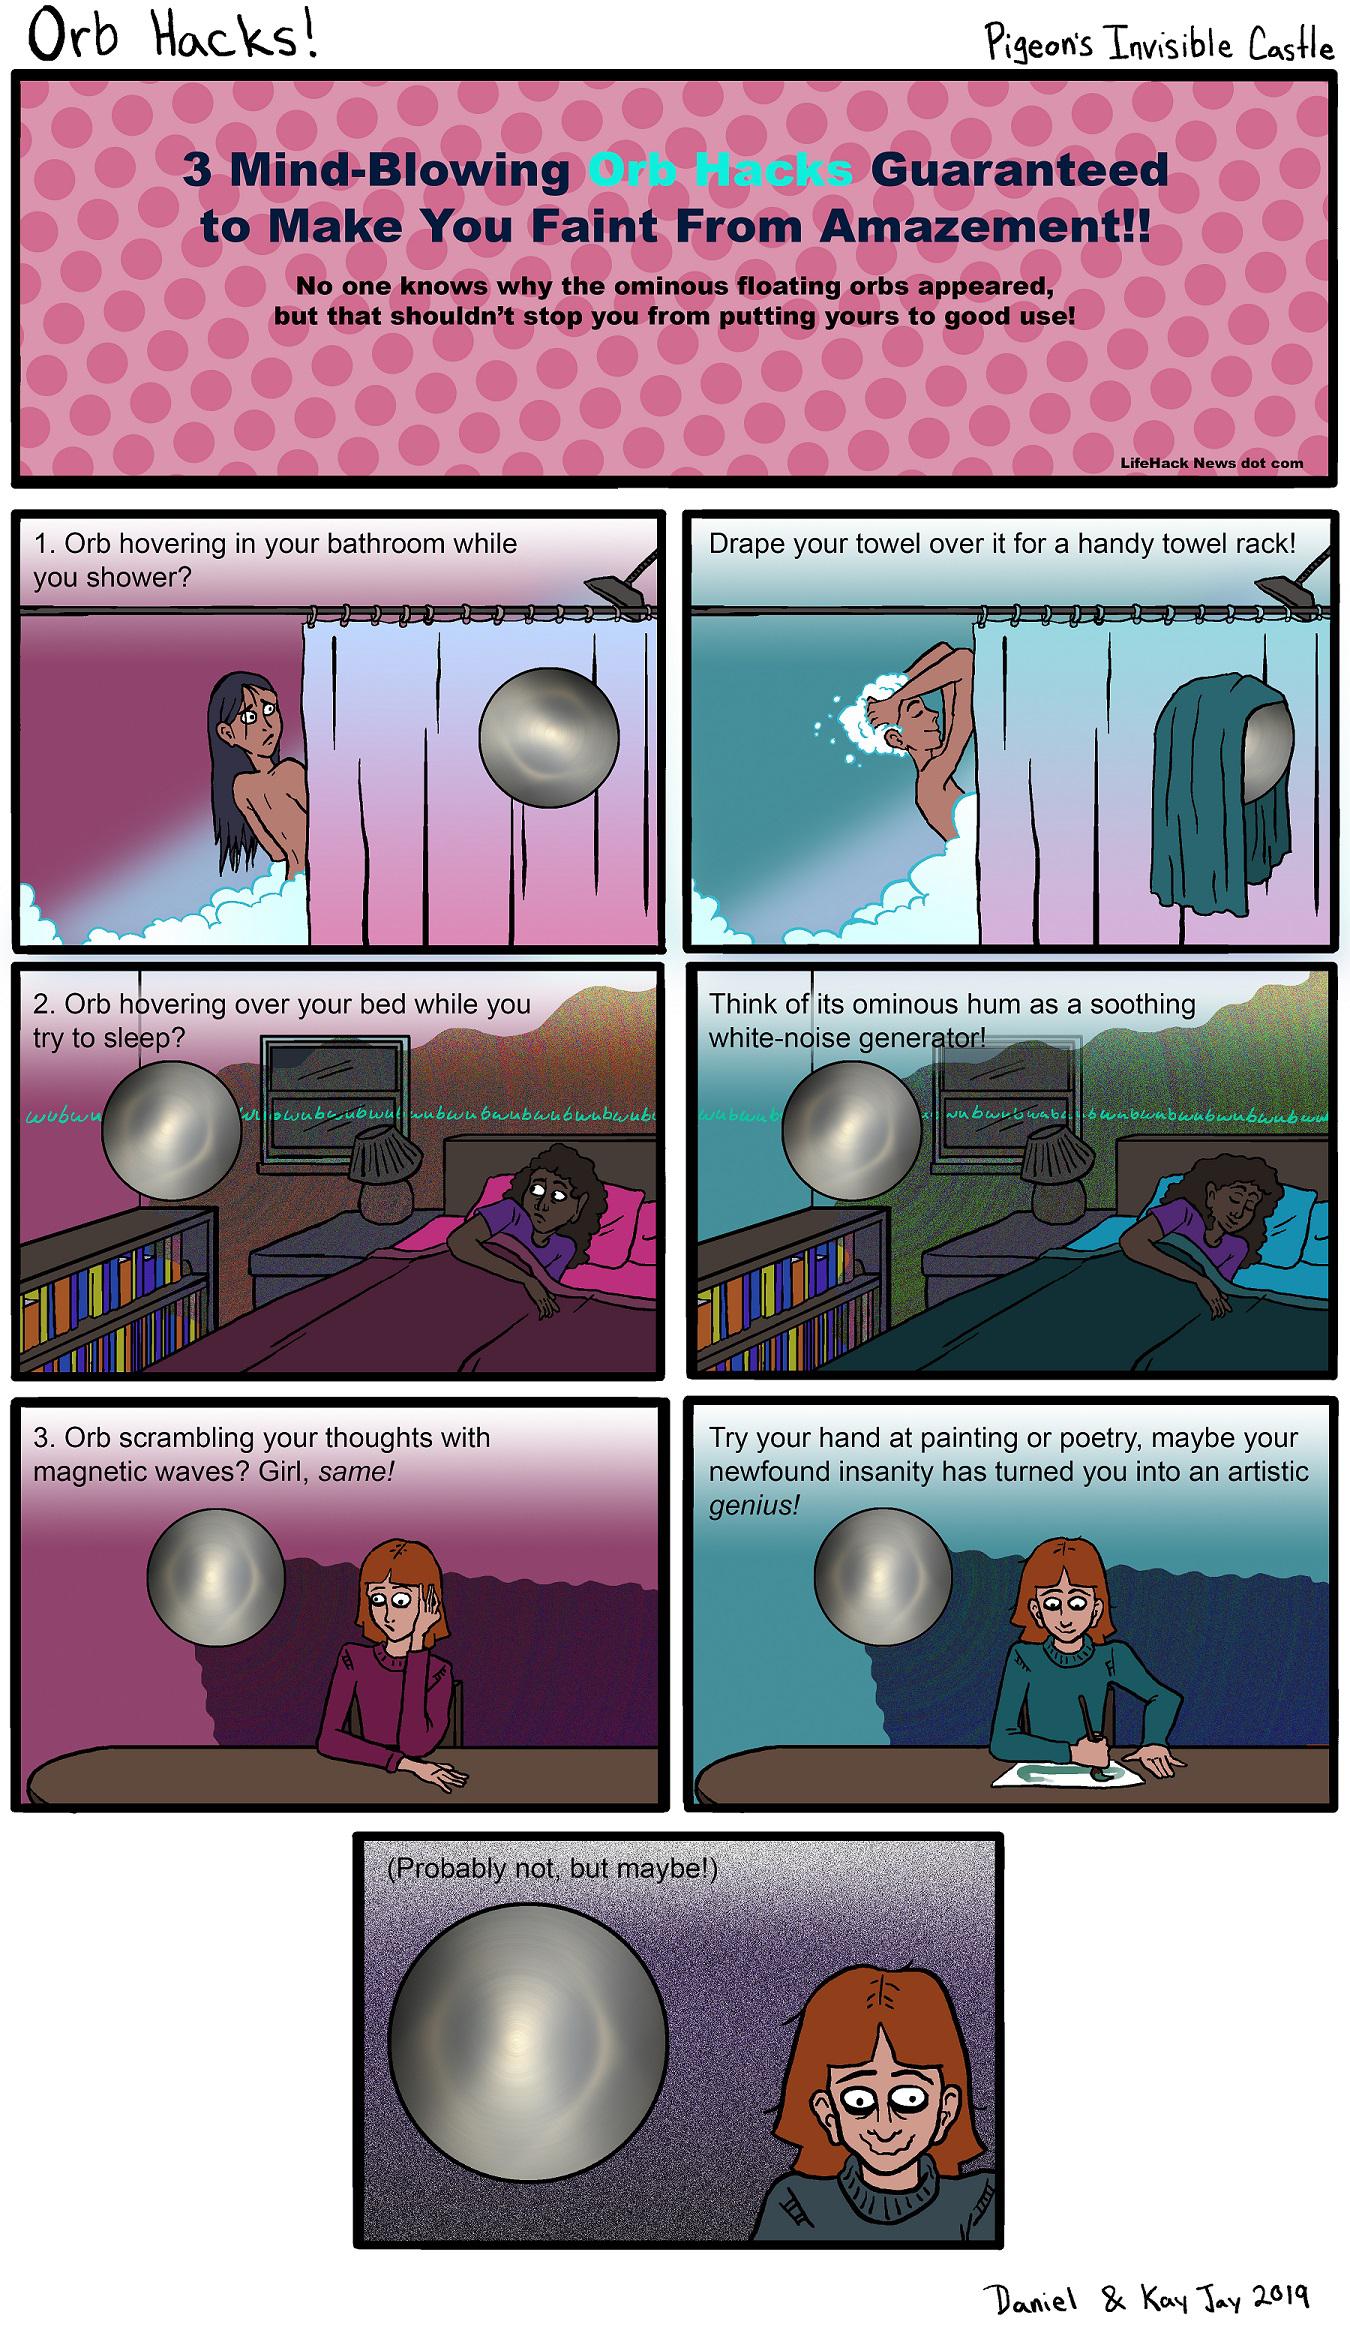 comics comics comics text: Orb l. 3 Mind-Blowing Guaranteed to Make You Faint From Amazement!! No one knows why the ominous floating orbs appeared, but that shouldn't stop you from putting yours to good use! 1. Orb hovering in your bathroom while you shower? 2. Orb h vering over your bed while you try to sle p? 3. Orb scrambling your thoughts with magnetic waves? Girl, same! LifeHack News dot com Drape your towel over it for a handy towel rack! Think ofLits ominous hum as a soothing white-ndise gener Try your hand at painting or poetry, maybe your newfound insanity has turned you into an artistic genius! gmbablbnqt butmaybe!) 